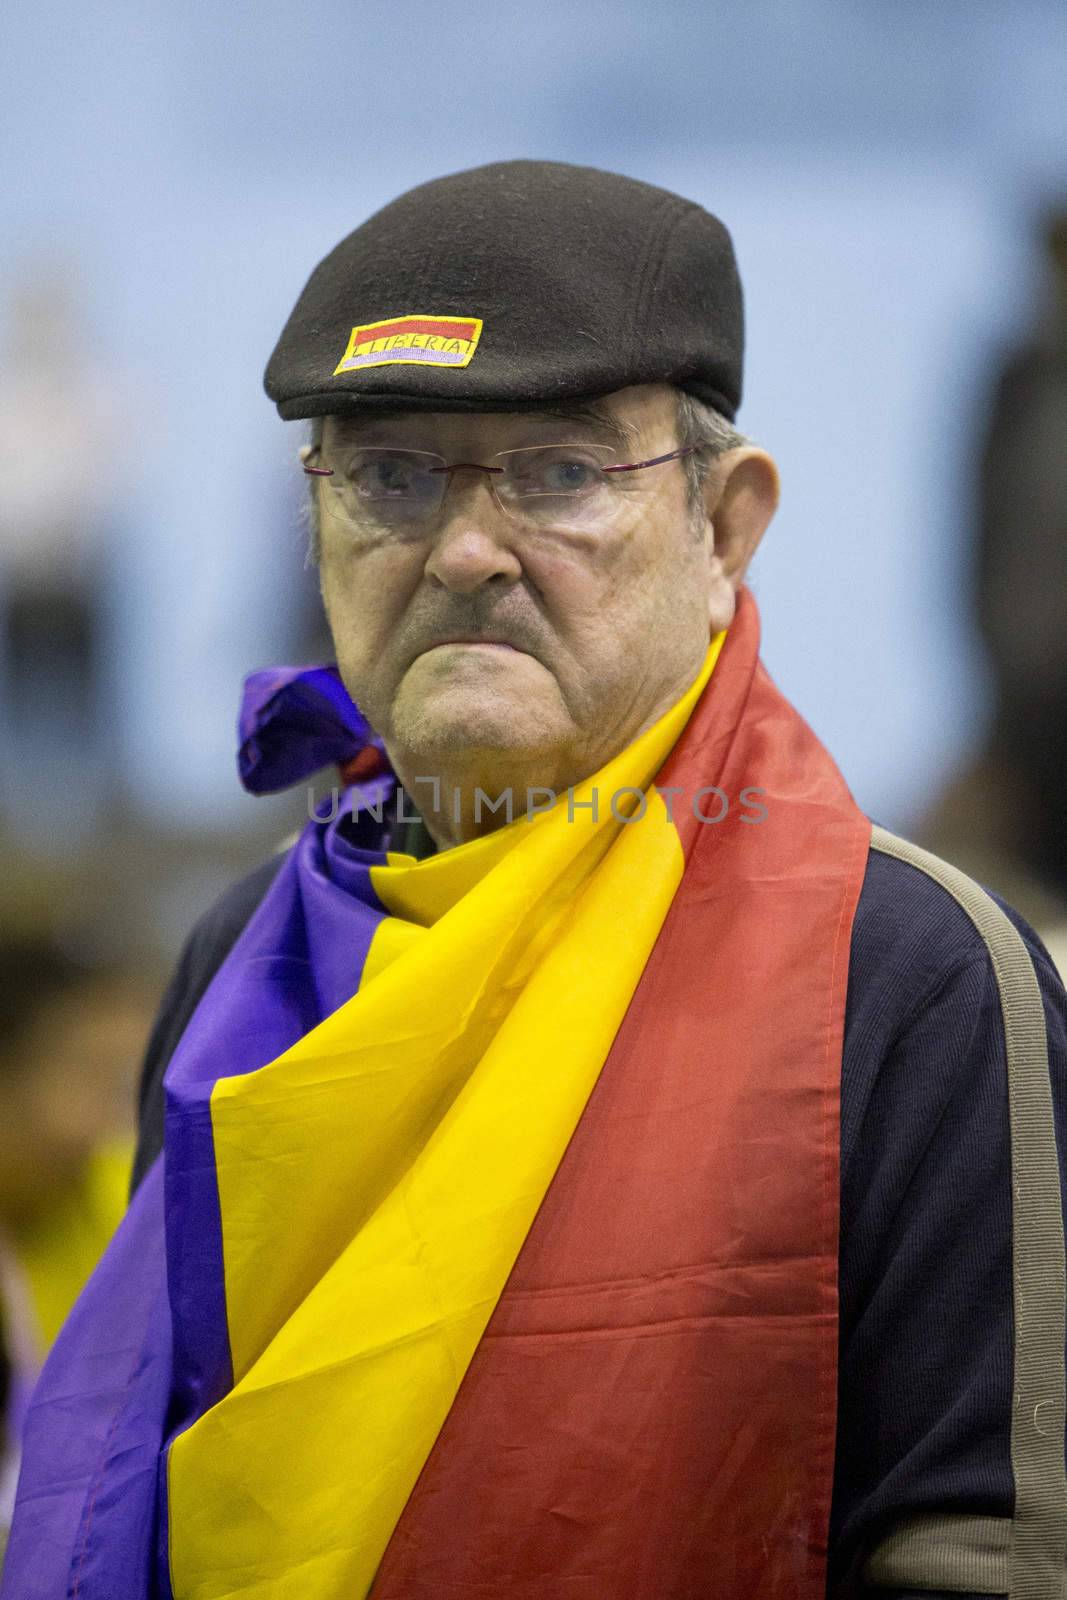 SPAIN, Barcelona: A supporter of the electoral coalition En Comu Podem (Together We Can) attends a campaign meeting at Hospitalet de Llobregat near Barcelona, Spain on December 5, 2015. Spain's general election takes place on December 20.